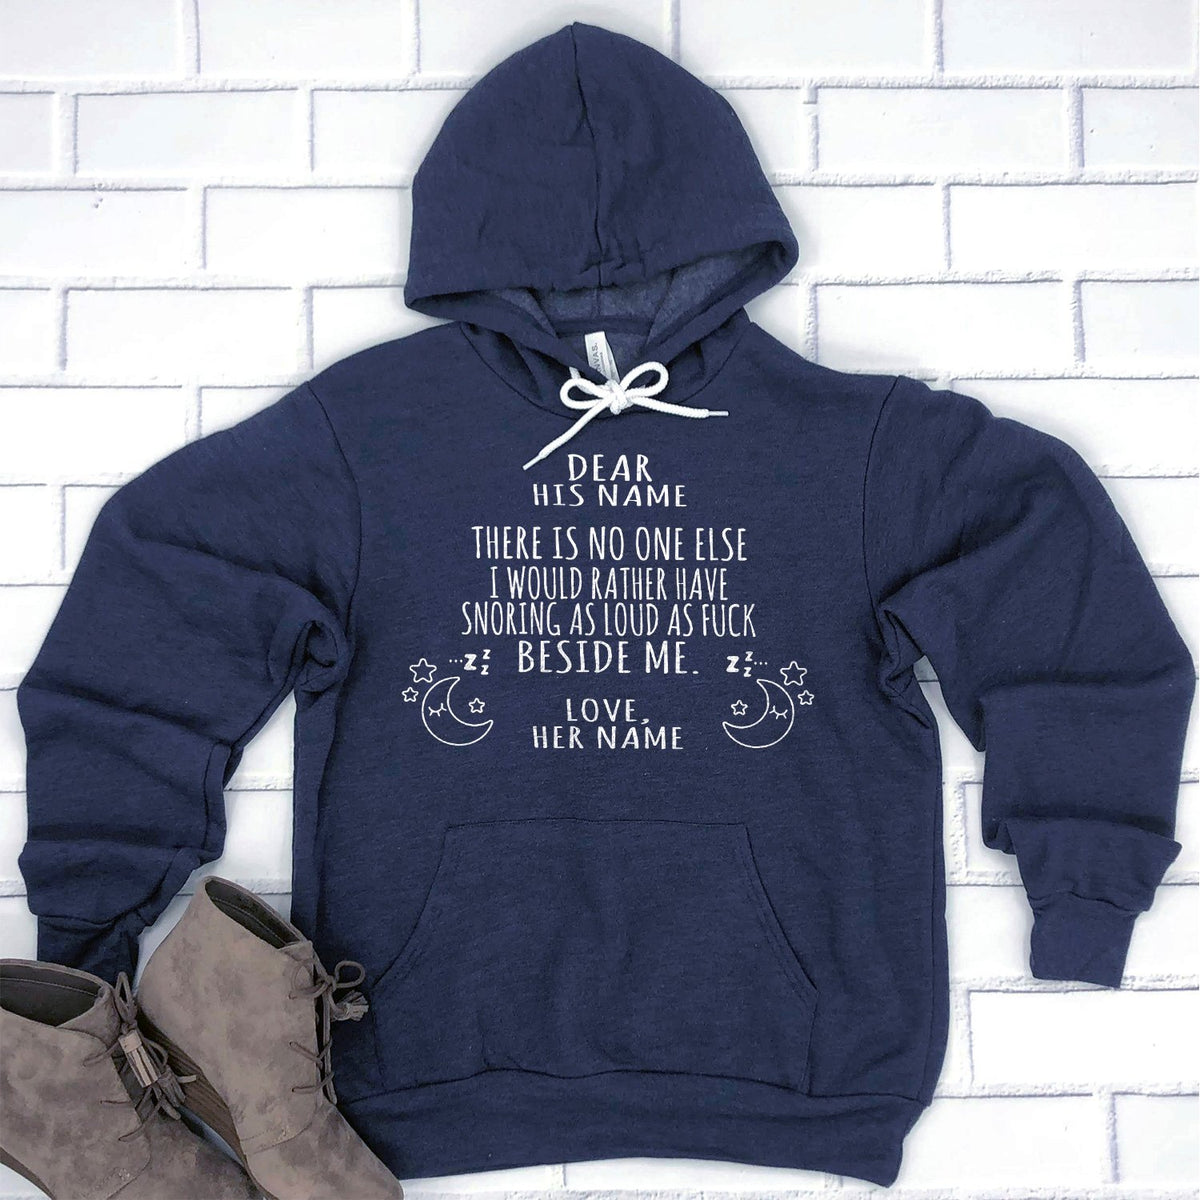 There is No One Else I Would Rather Have Snoring As Loud As Fuck Beside Me - Hoodie Sweatshirt